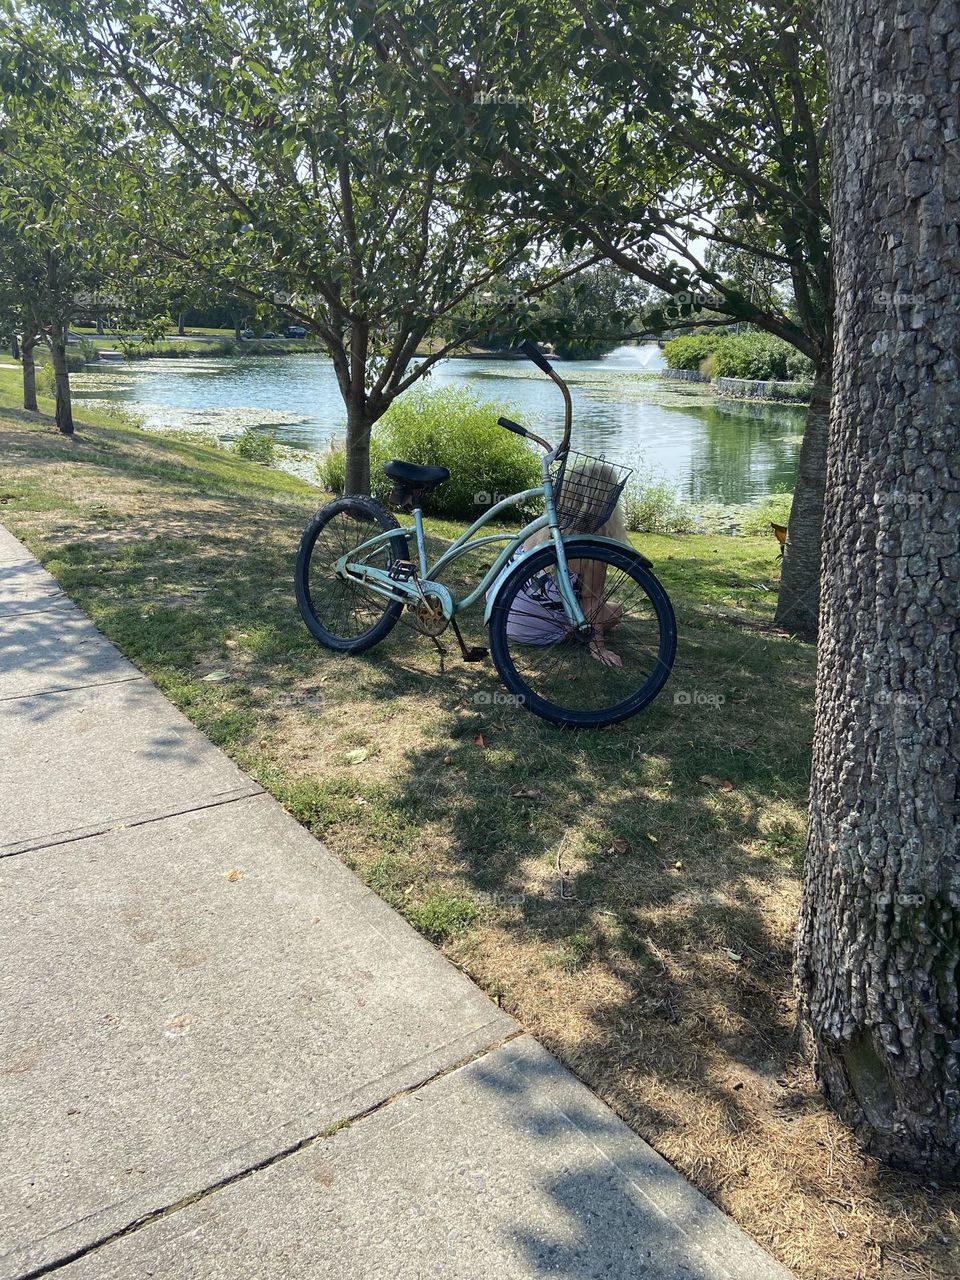 A woman sits on the grass in front of her bike at a local park. It’s a good spot to rest and view the lake before riding back home. Trees provide shade and shadows, and sunlight glimmers on the water. 